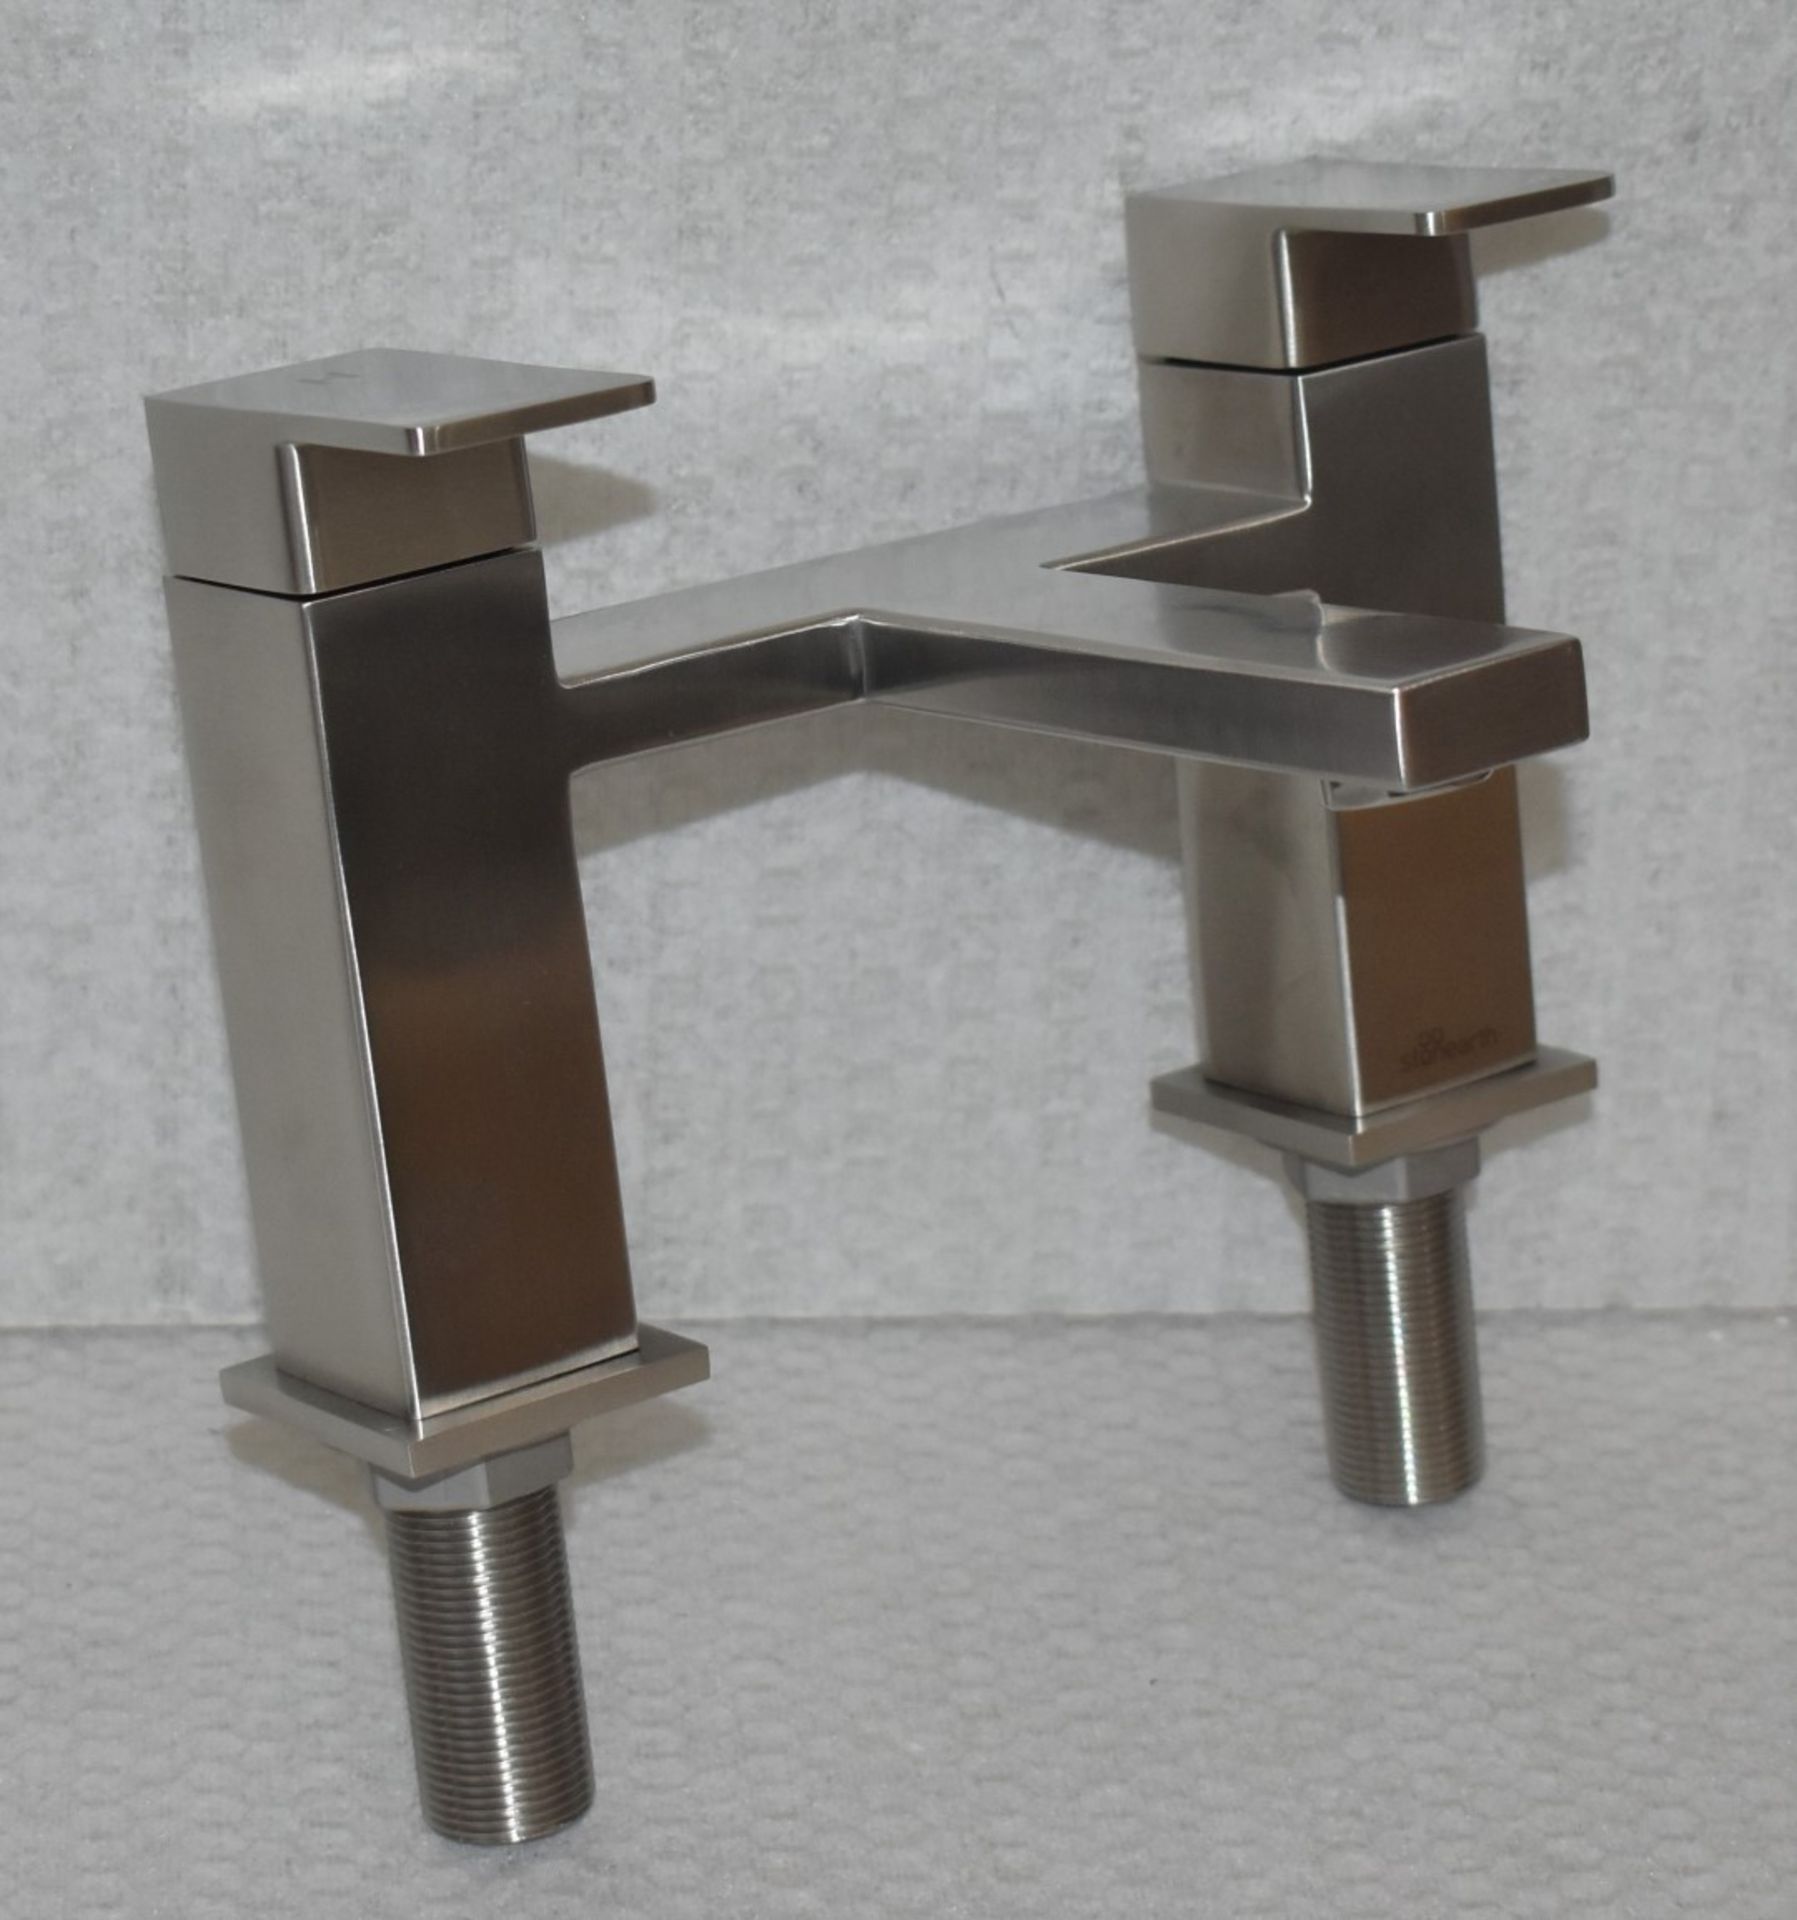 1 x Stonearth 'Metro' Stainless Steel Bath Filler Mixer Tap - Brand New & Boxed - RRP £340 - Ref: - Image 7 of 14